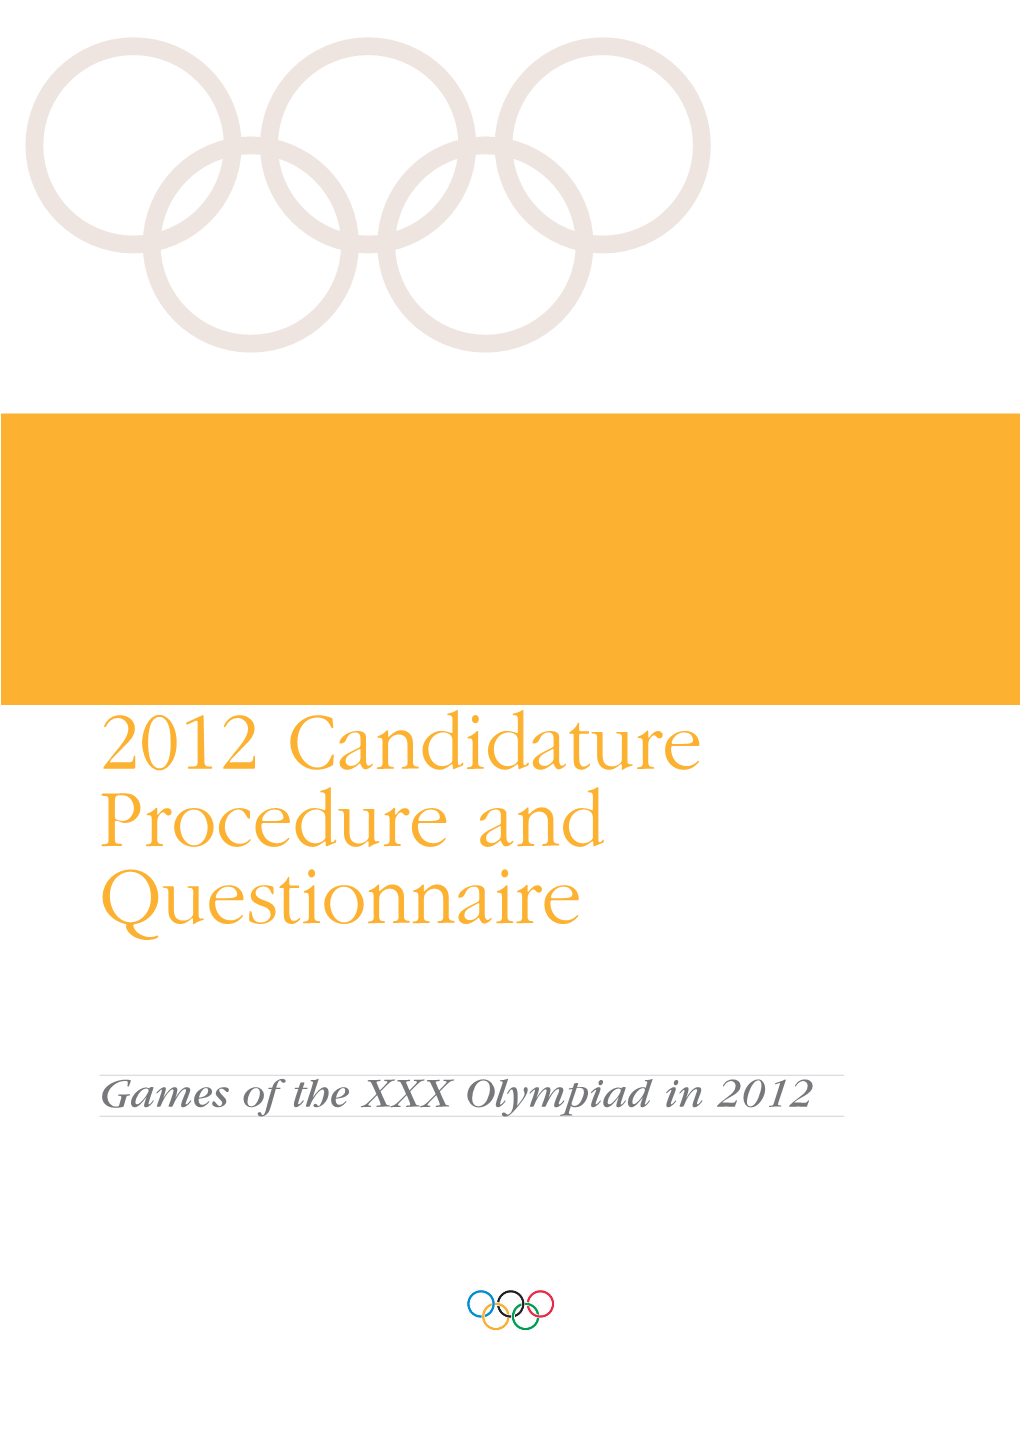 2012 Candidature Procedure and Questionnaire